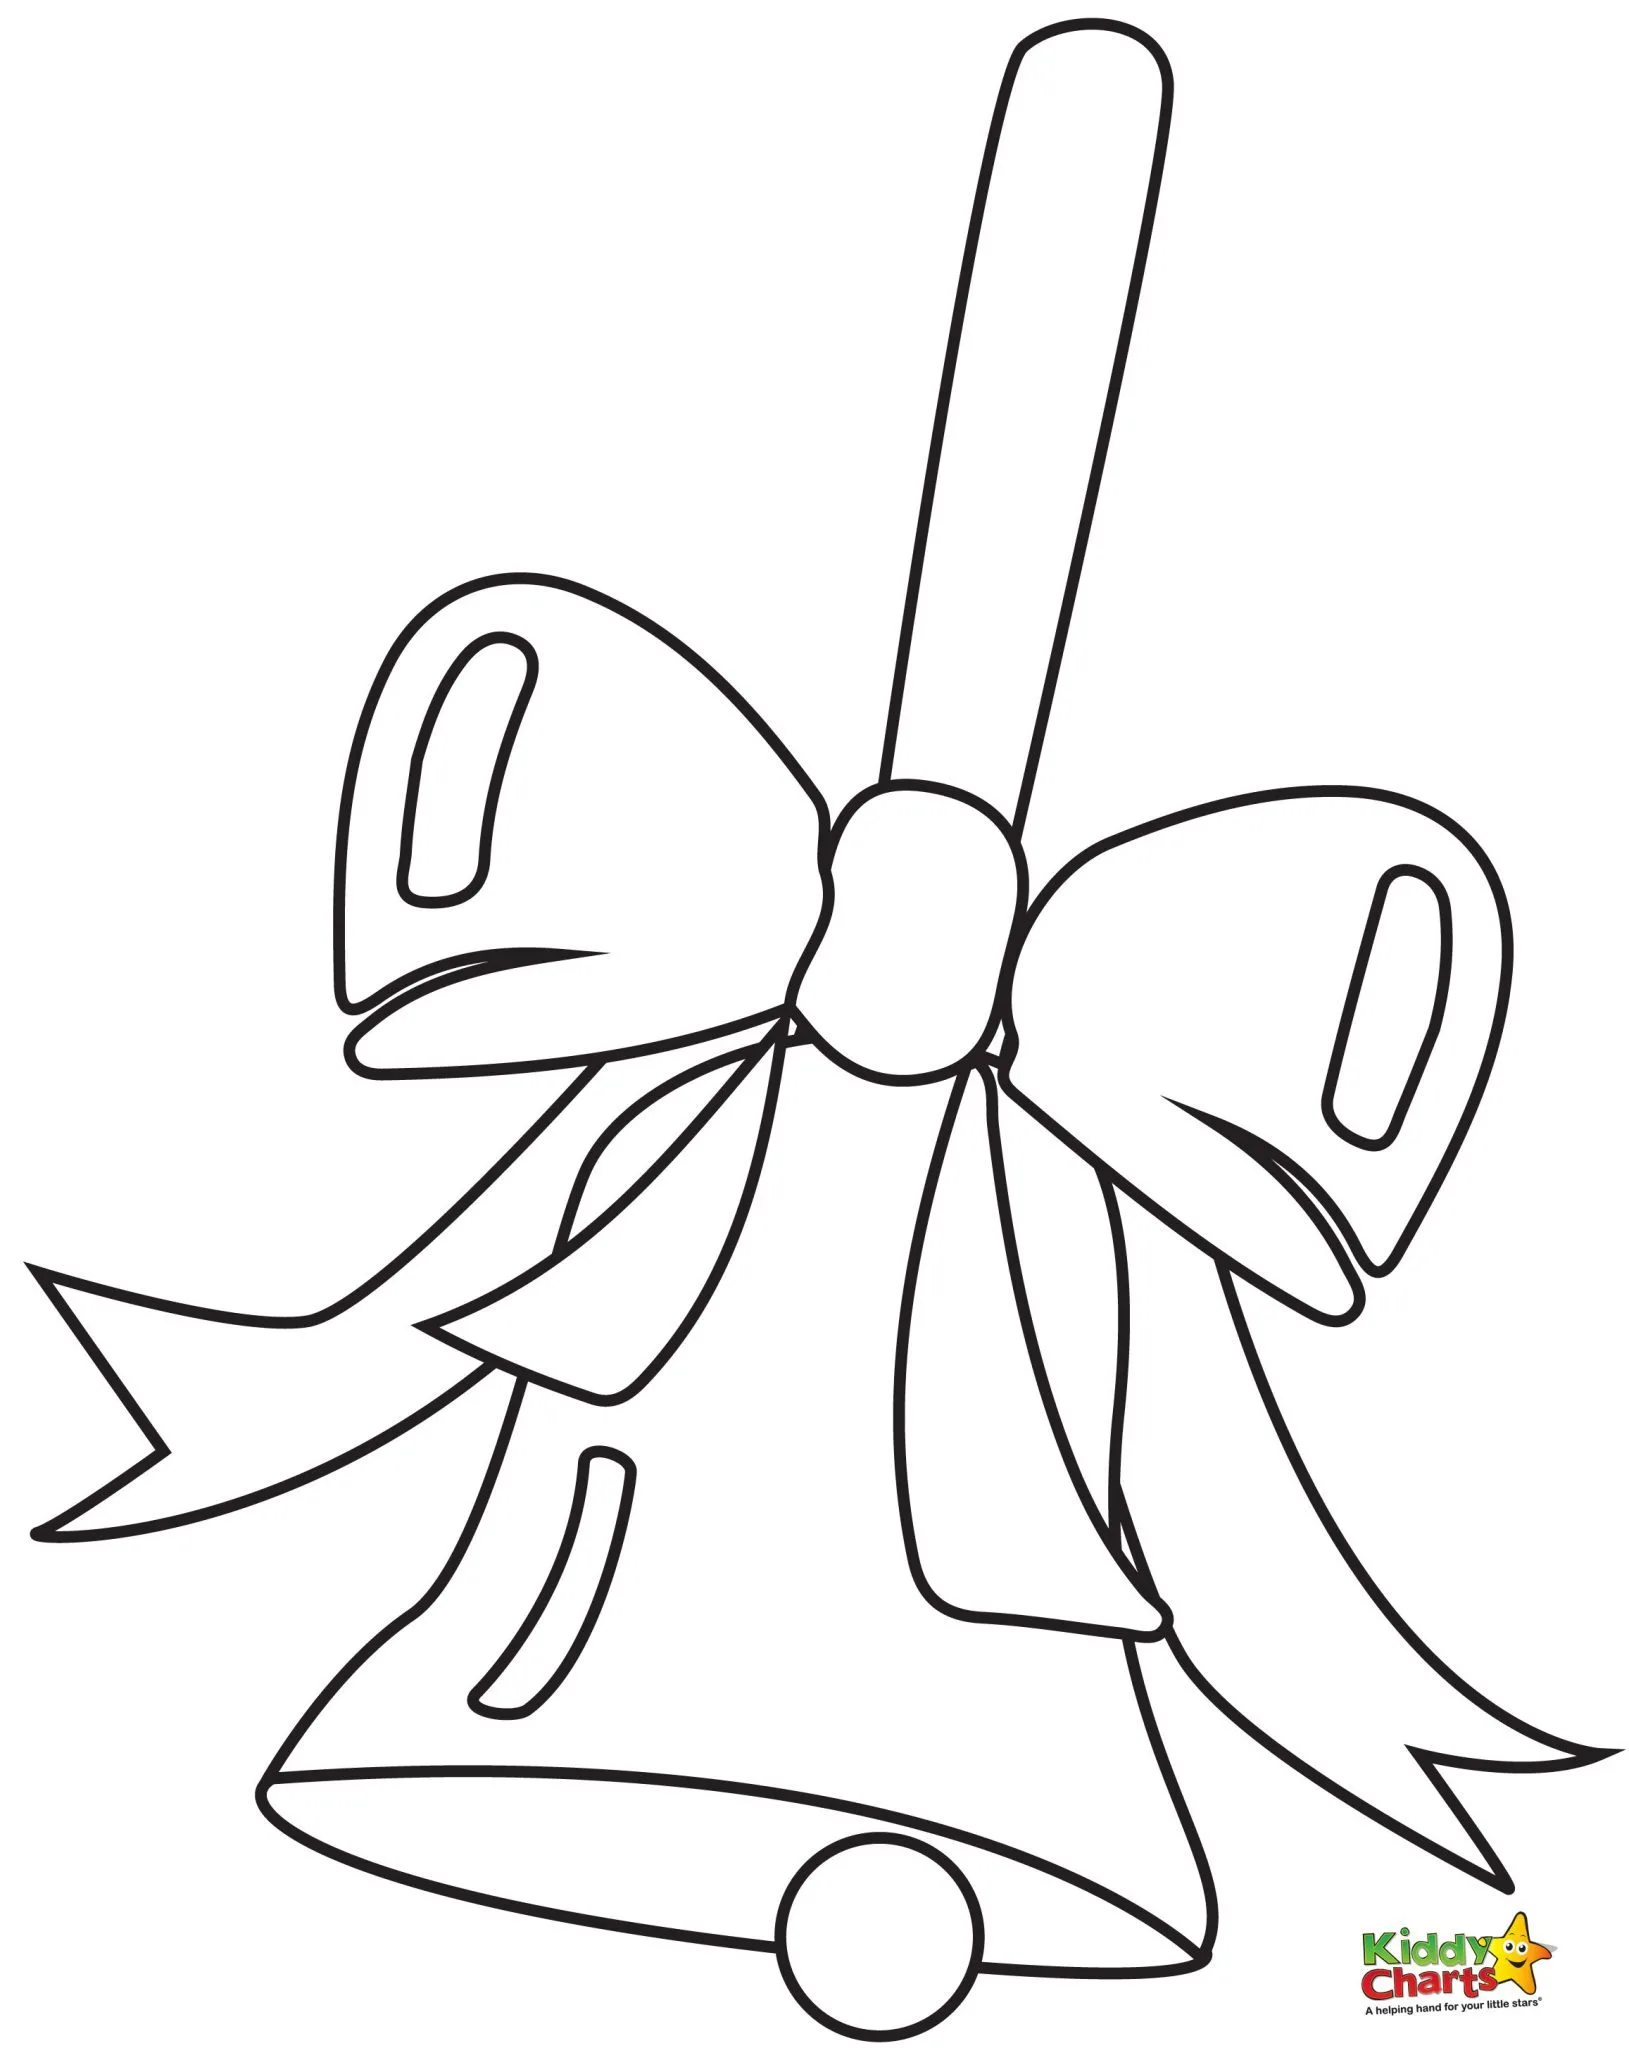 Bell with a Bow - Printable Christmas Coloring Pages